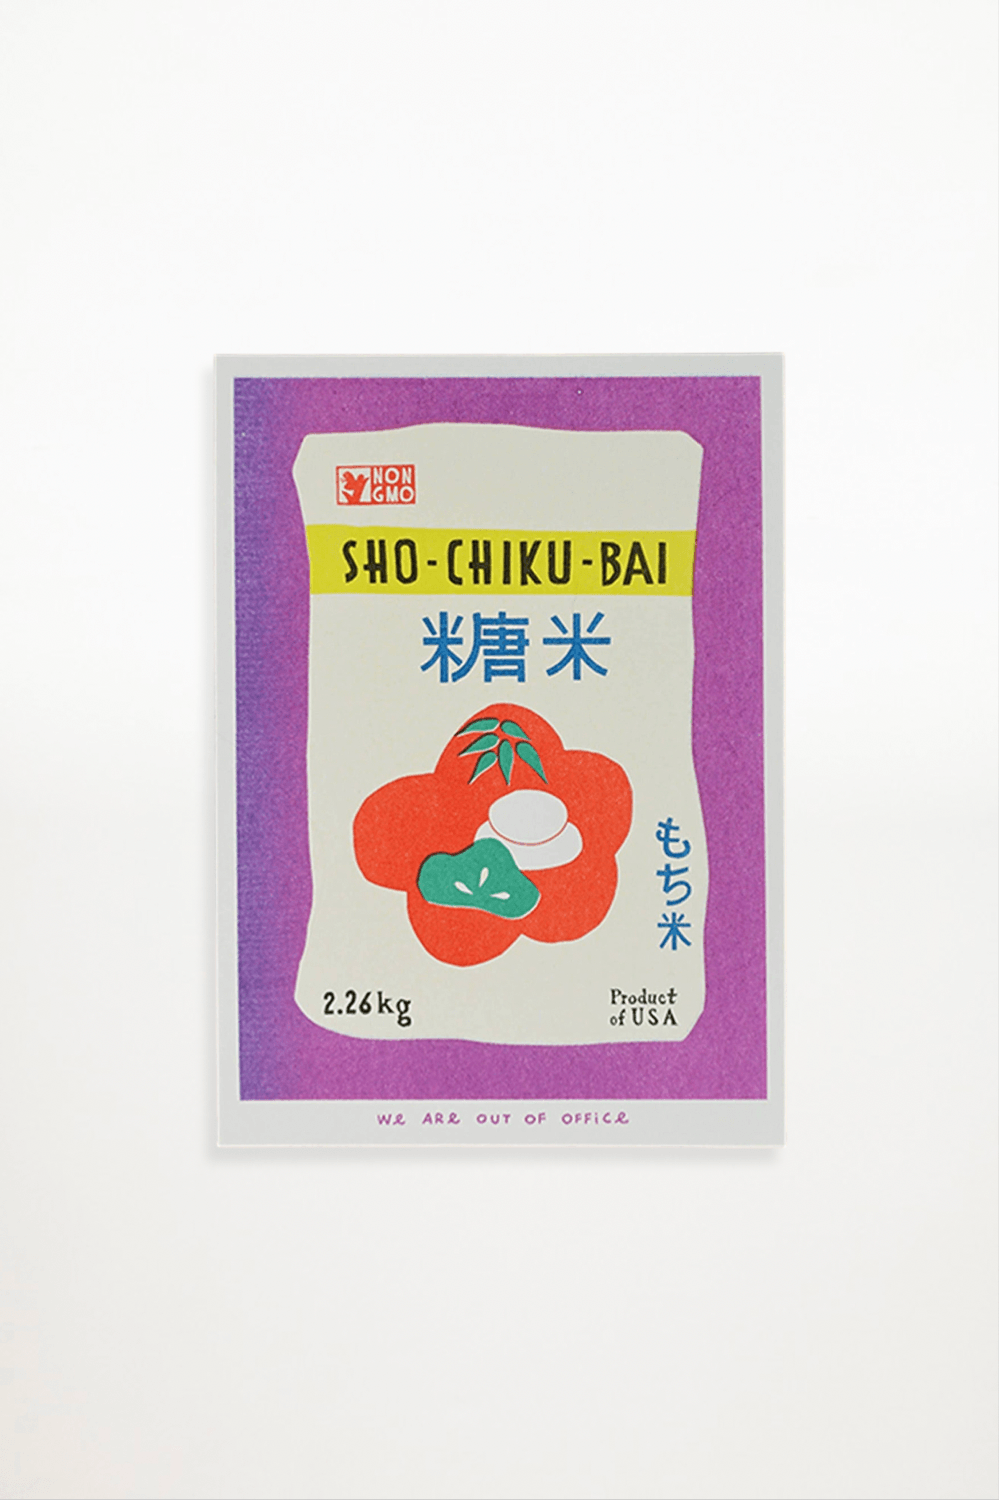 We are out of office - A risograph print of bag full of sweet rice - Ensemble Studios